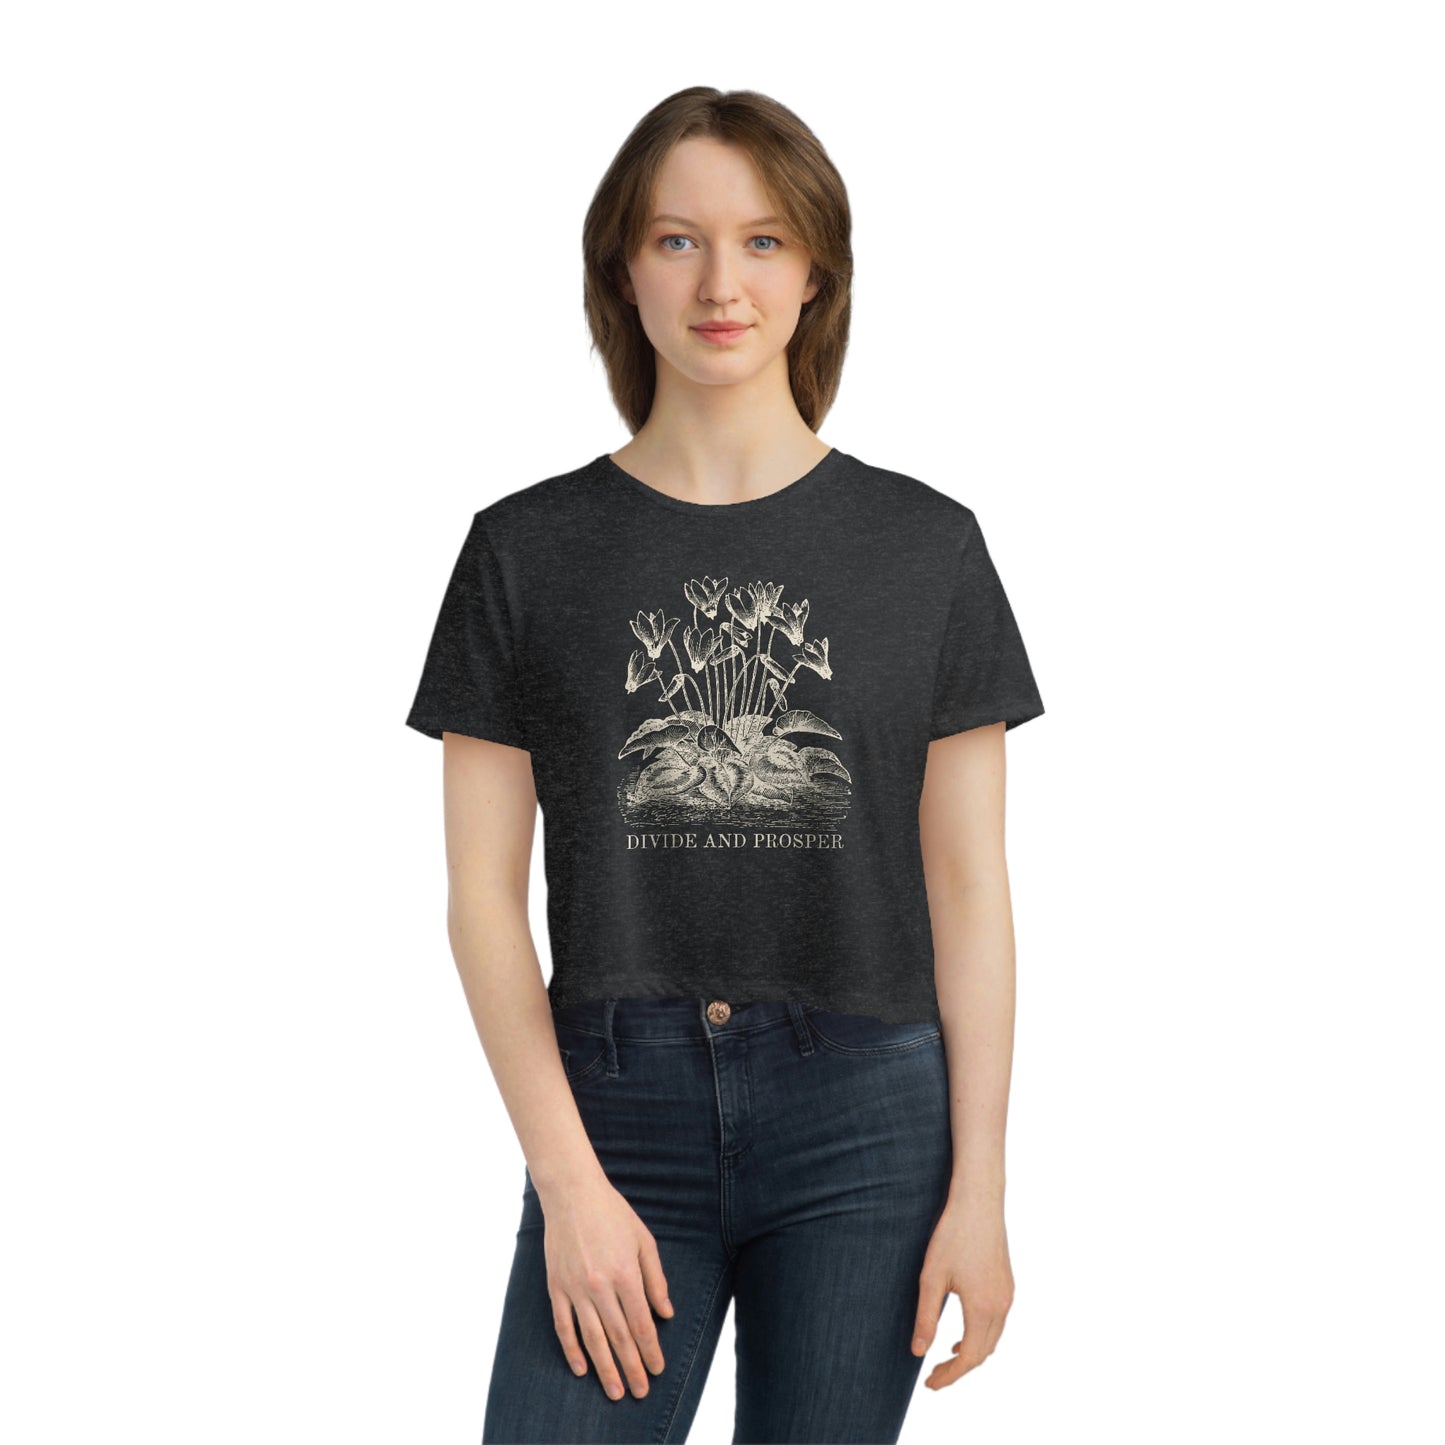 DIVIDE AND PROSPER- Women's Flowy Cropped Tee